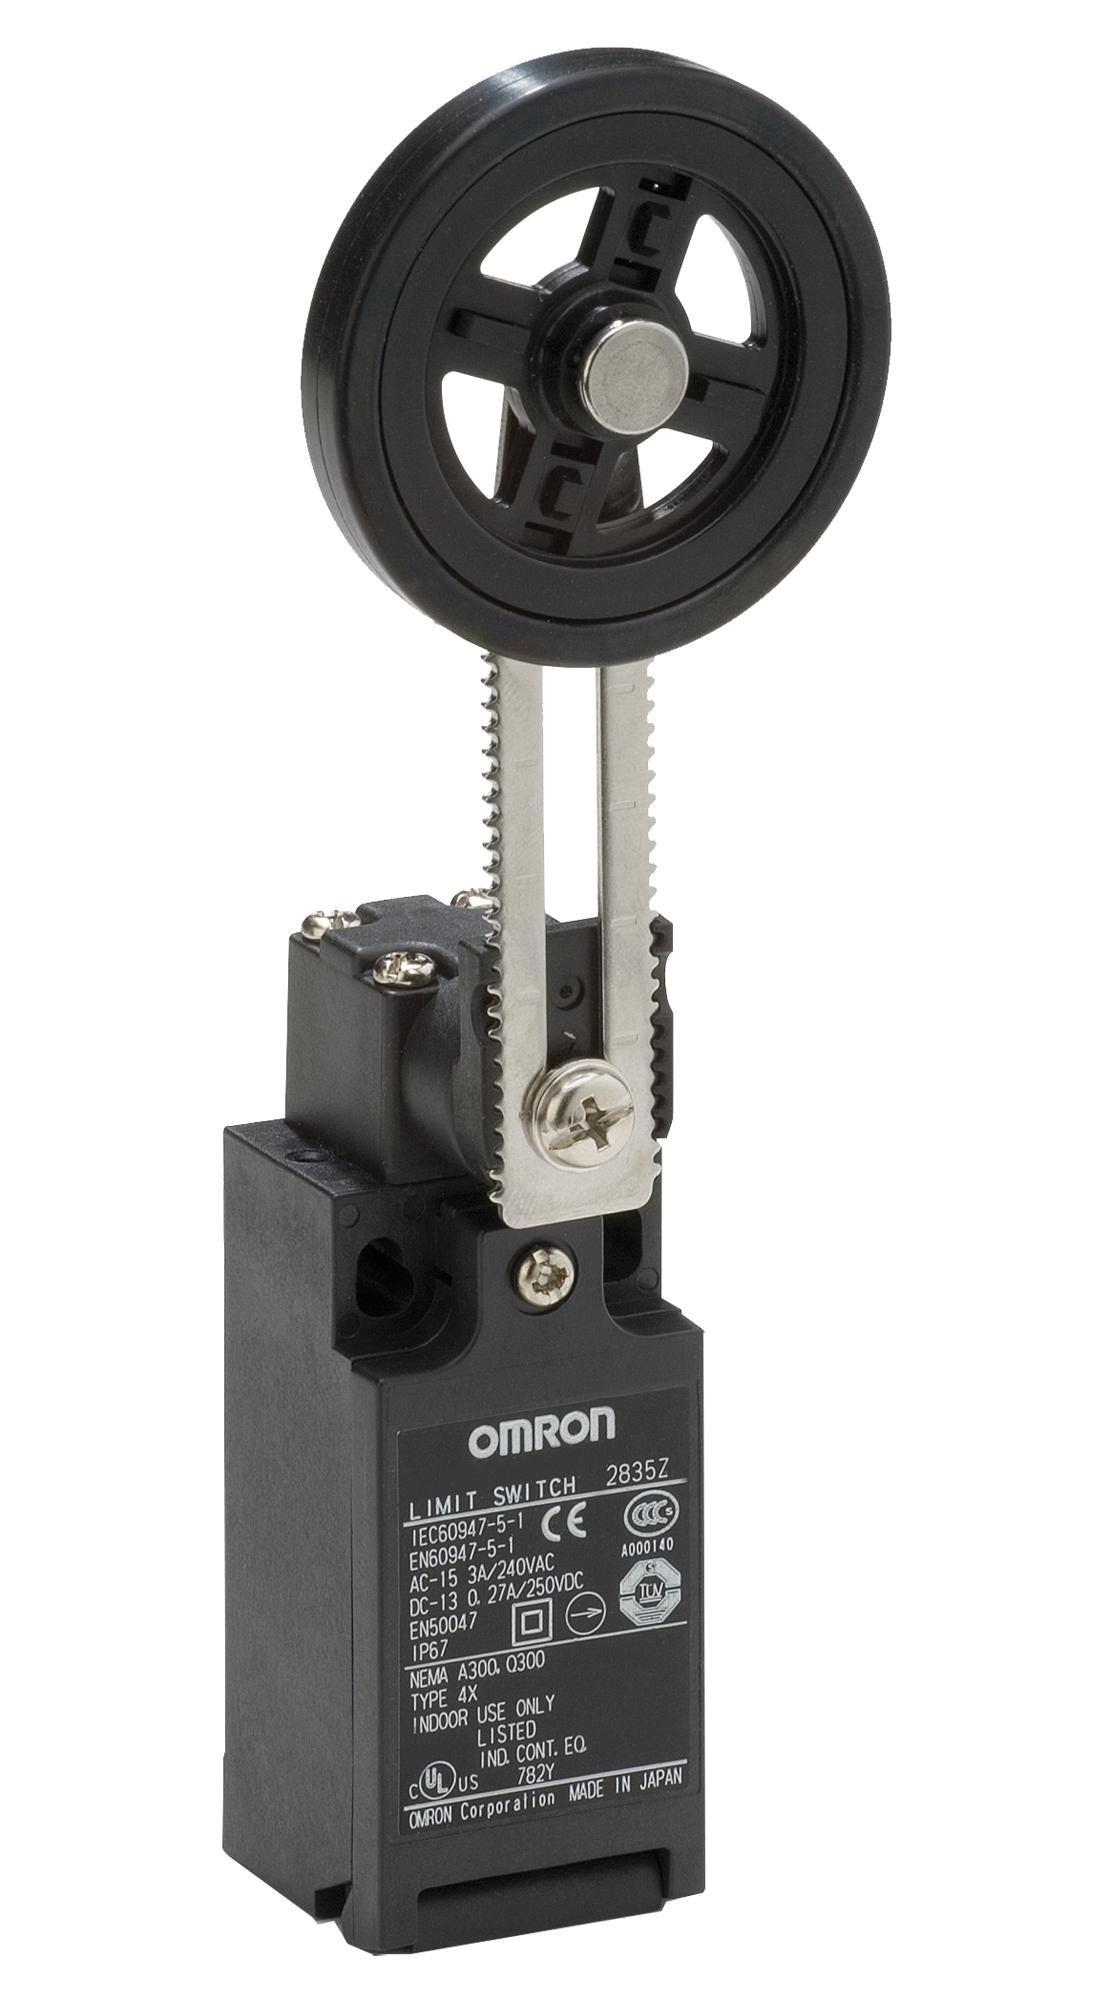 D4N-112H LIMIT SWITCH SWITCHES OMRON